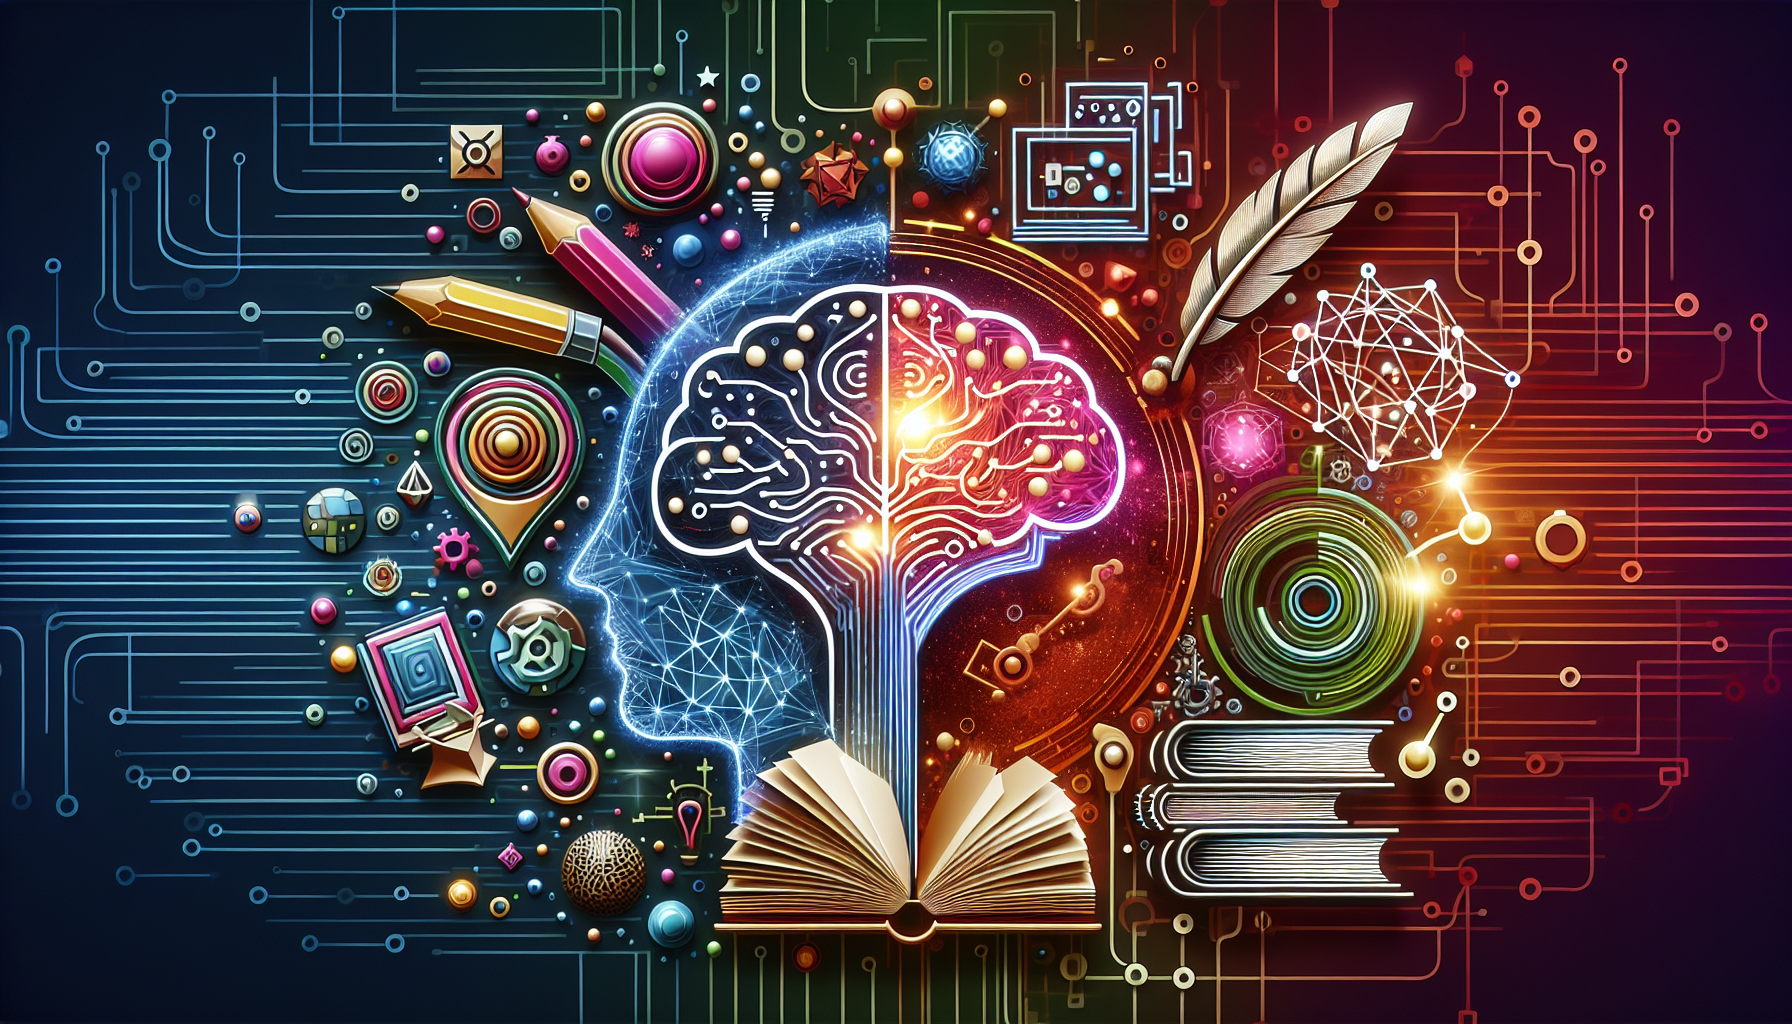 An engaging image that visualizes the role of artificial intelligence in story and plot development. The image should be vibrant, modern, and devoid of any textual elements. It could include an abstract symbolization of an AI, perhaps a brain with circuits, and symbolic representations of classic plot elements such as a stack of books, a quill, or a theatre mask. The images should intersect in a harmonious way that suggests integration and interaction, possibly showing the AI enhancing or transforming these classic plot elements.